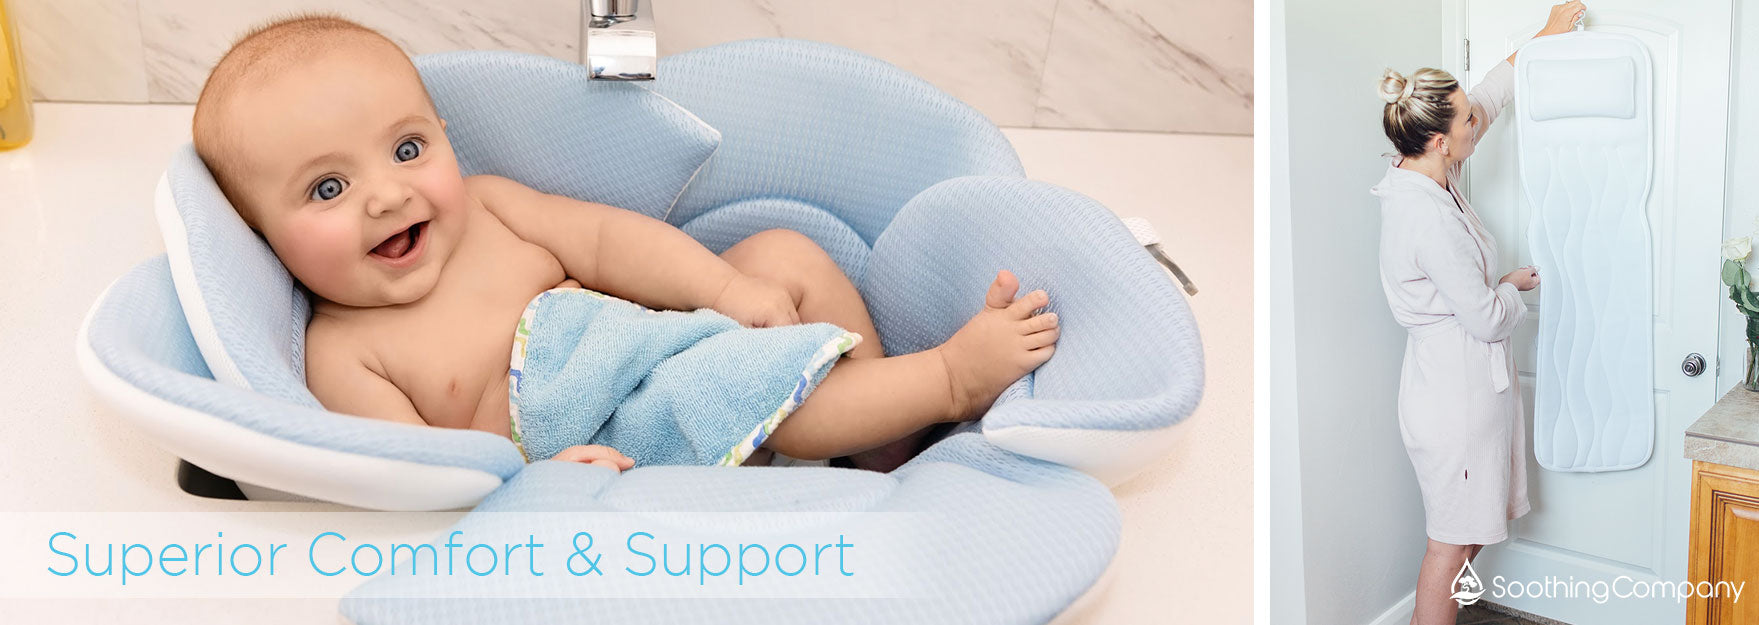  Soothing Company Baby Bath Pillow, Baby Newborn